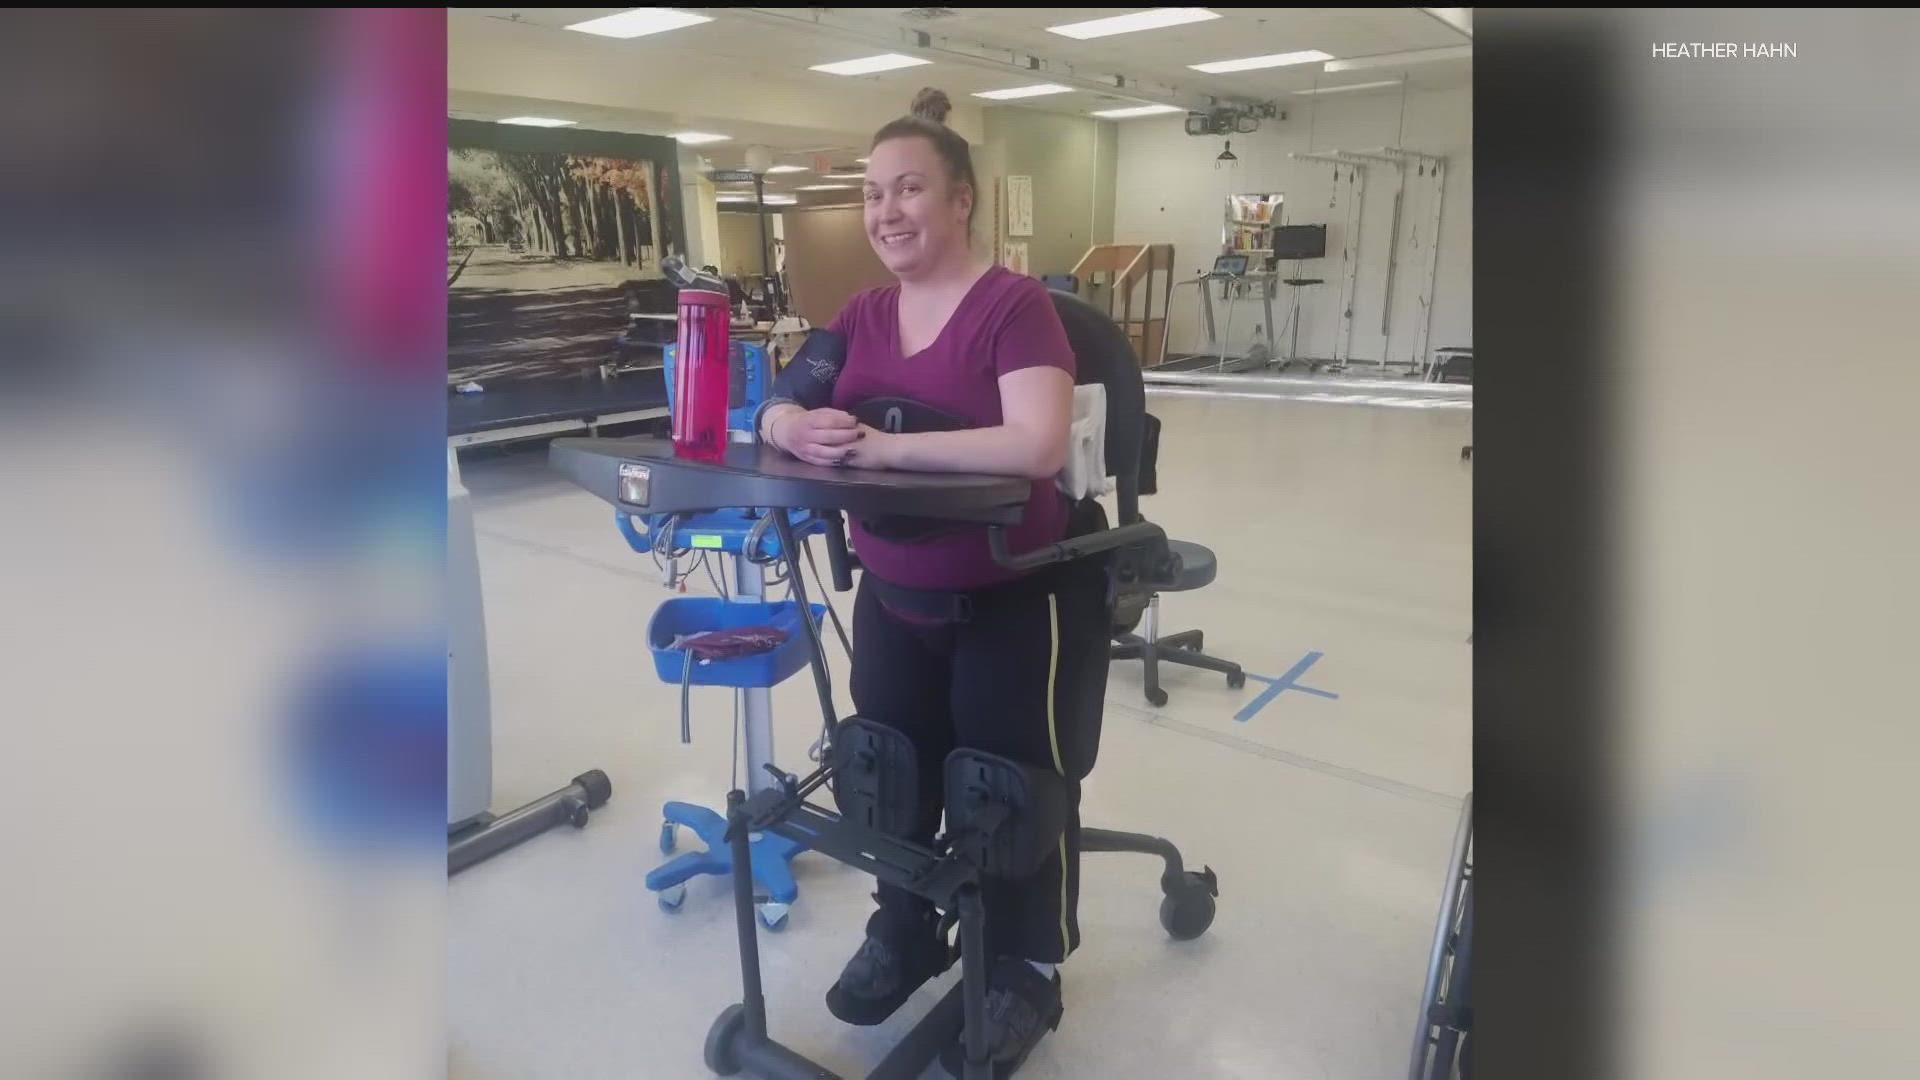 "When you're paralyzed like that, it's like it's all gone, and you want to just sit in bed and cry," said Heather Hahn.